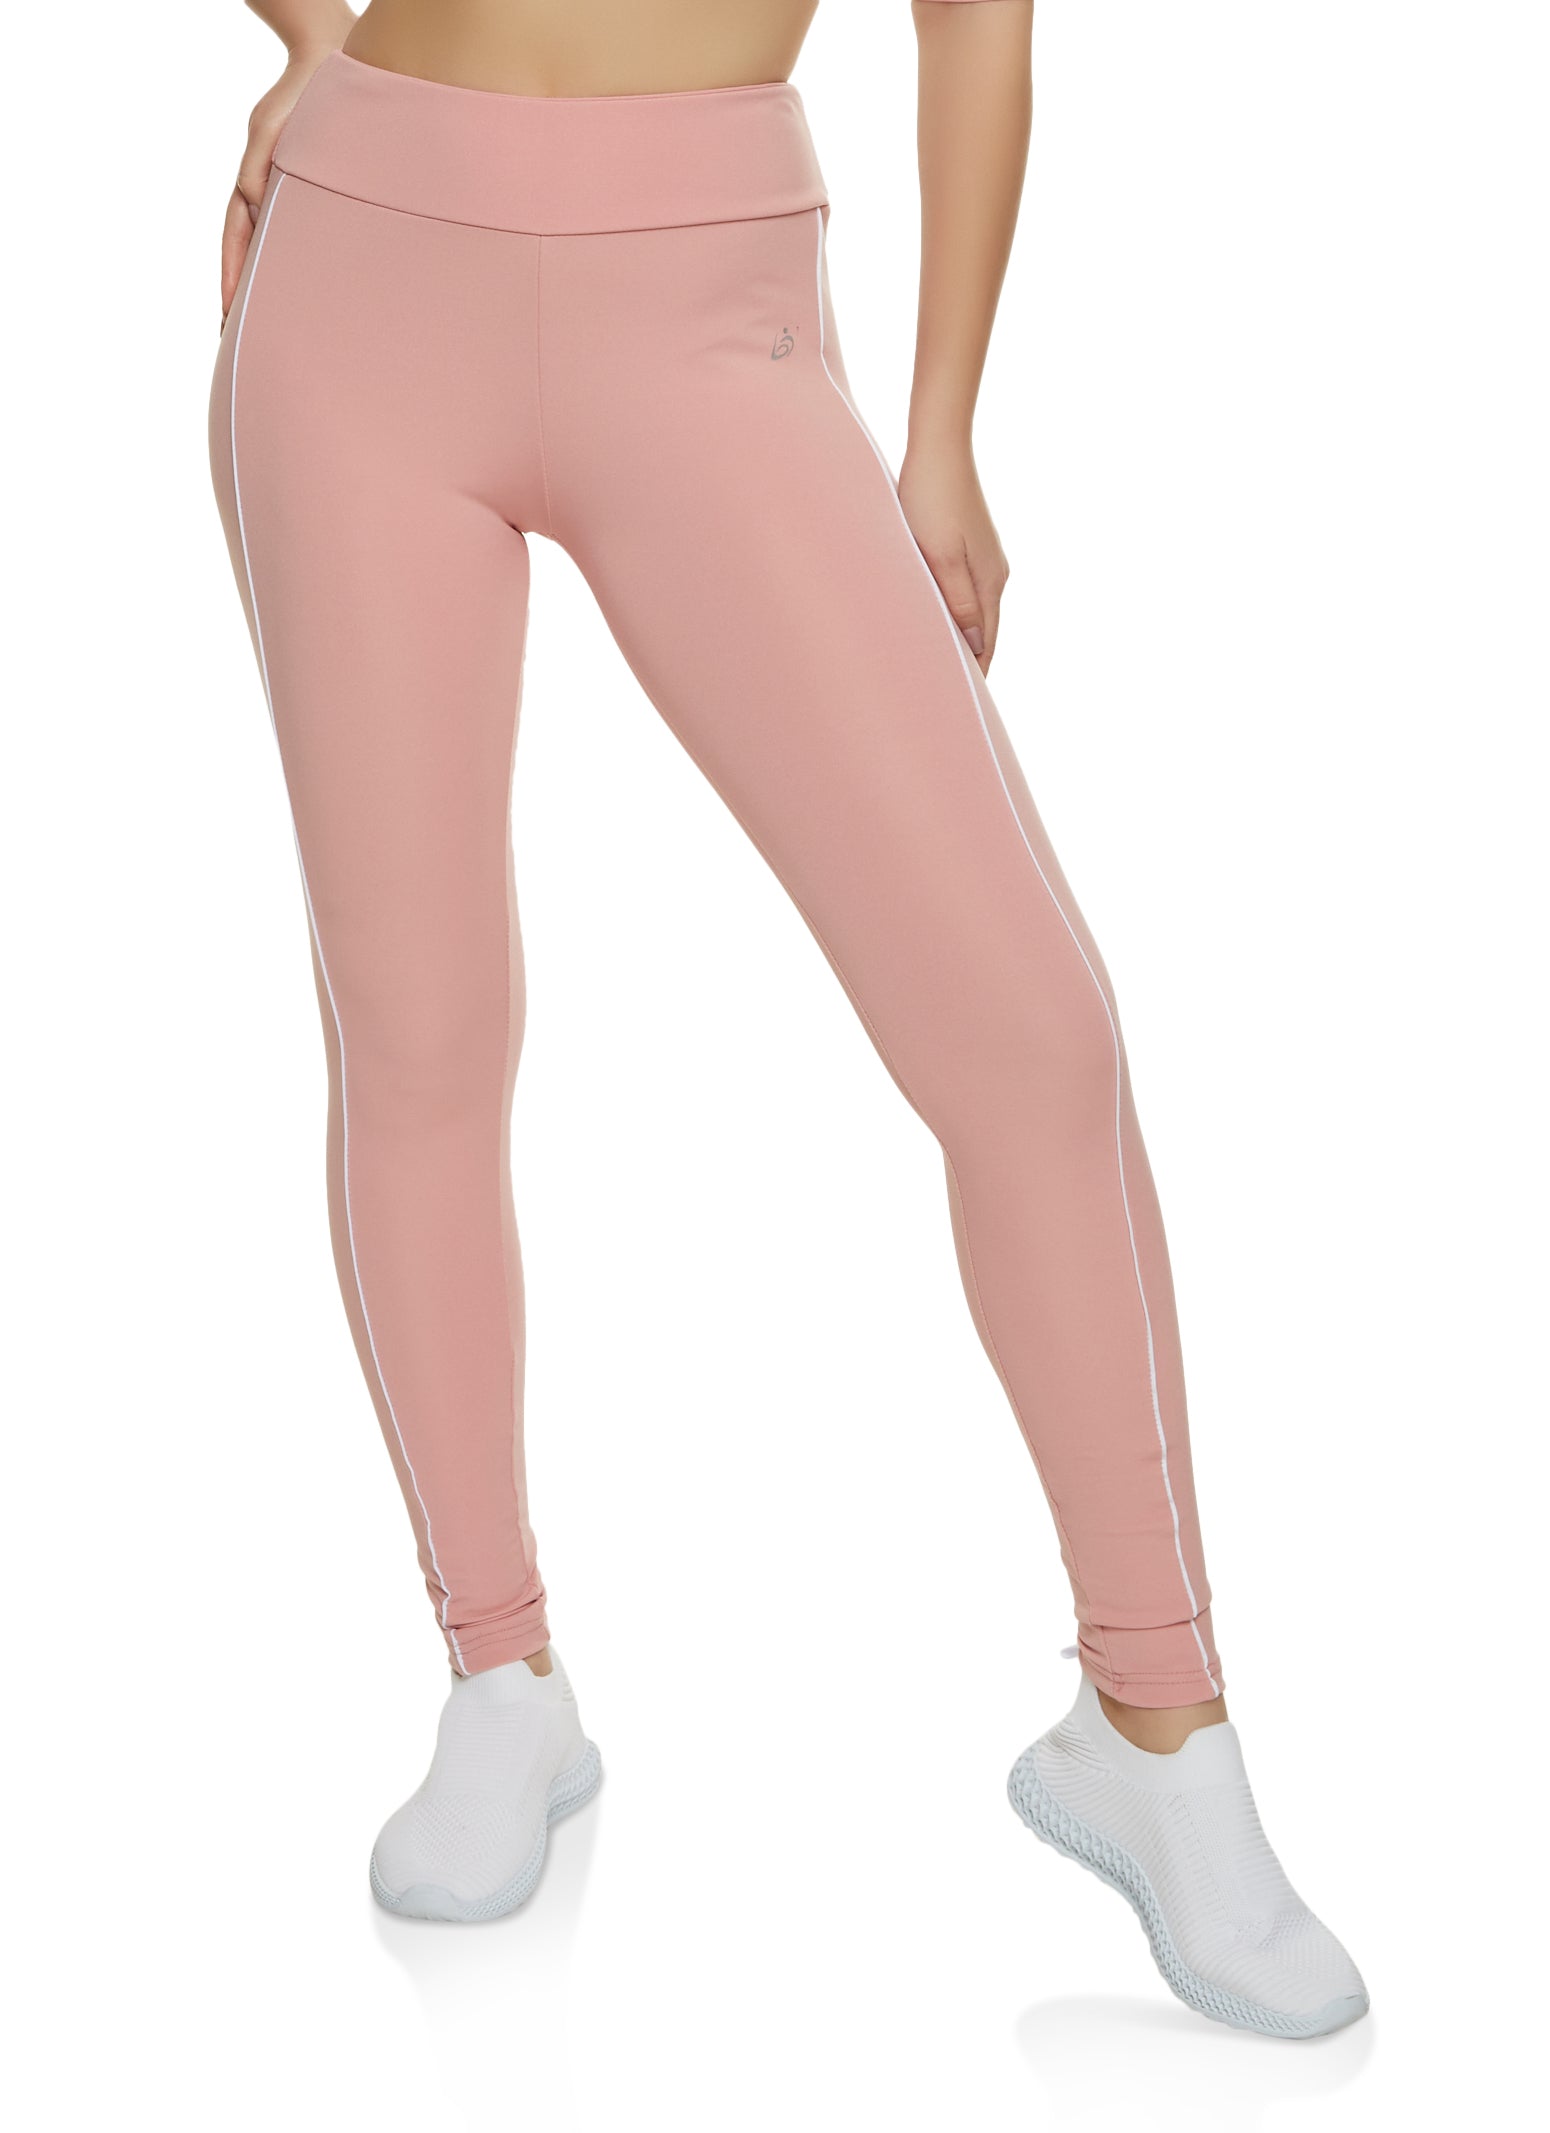 Womens Athletic Shoes, Clothes & Gear - Leggings in Pink | Under Armour